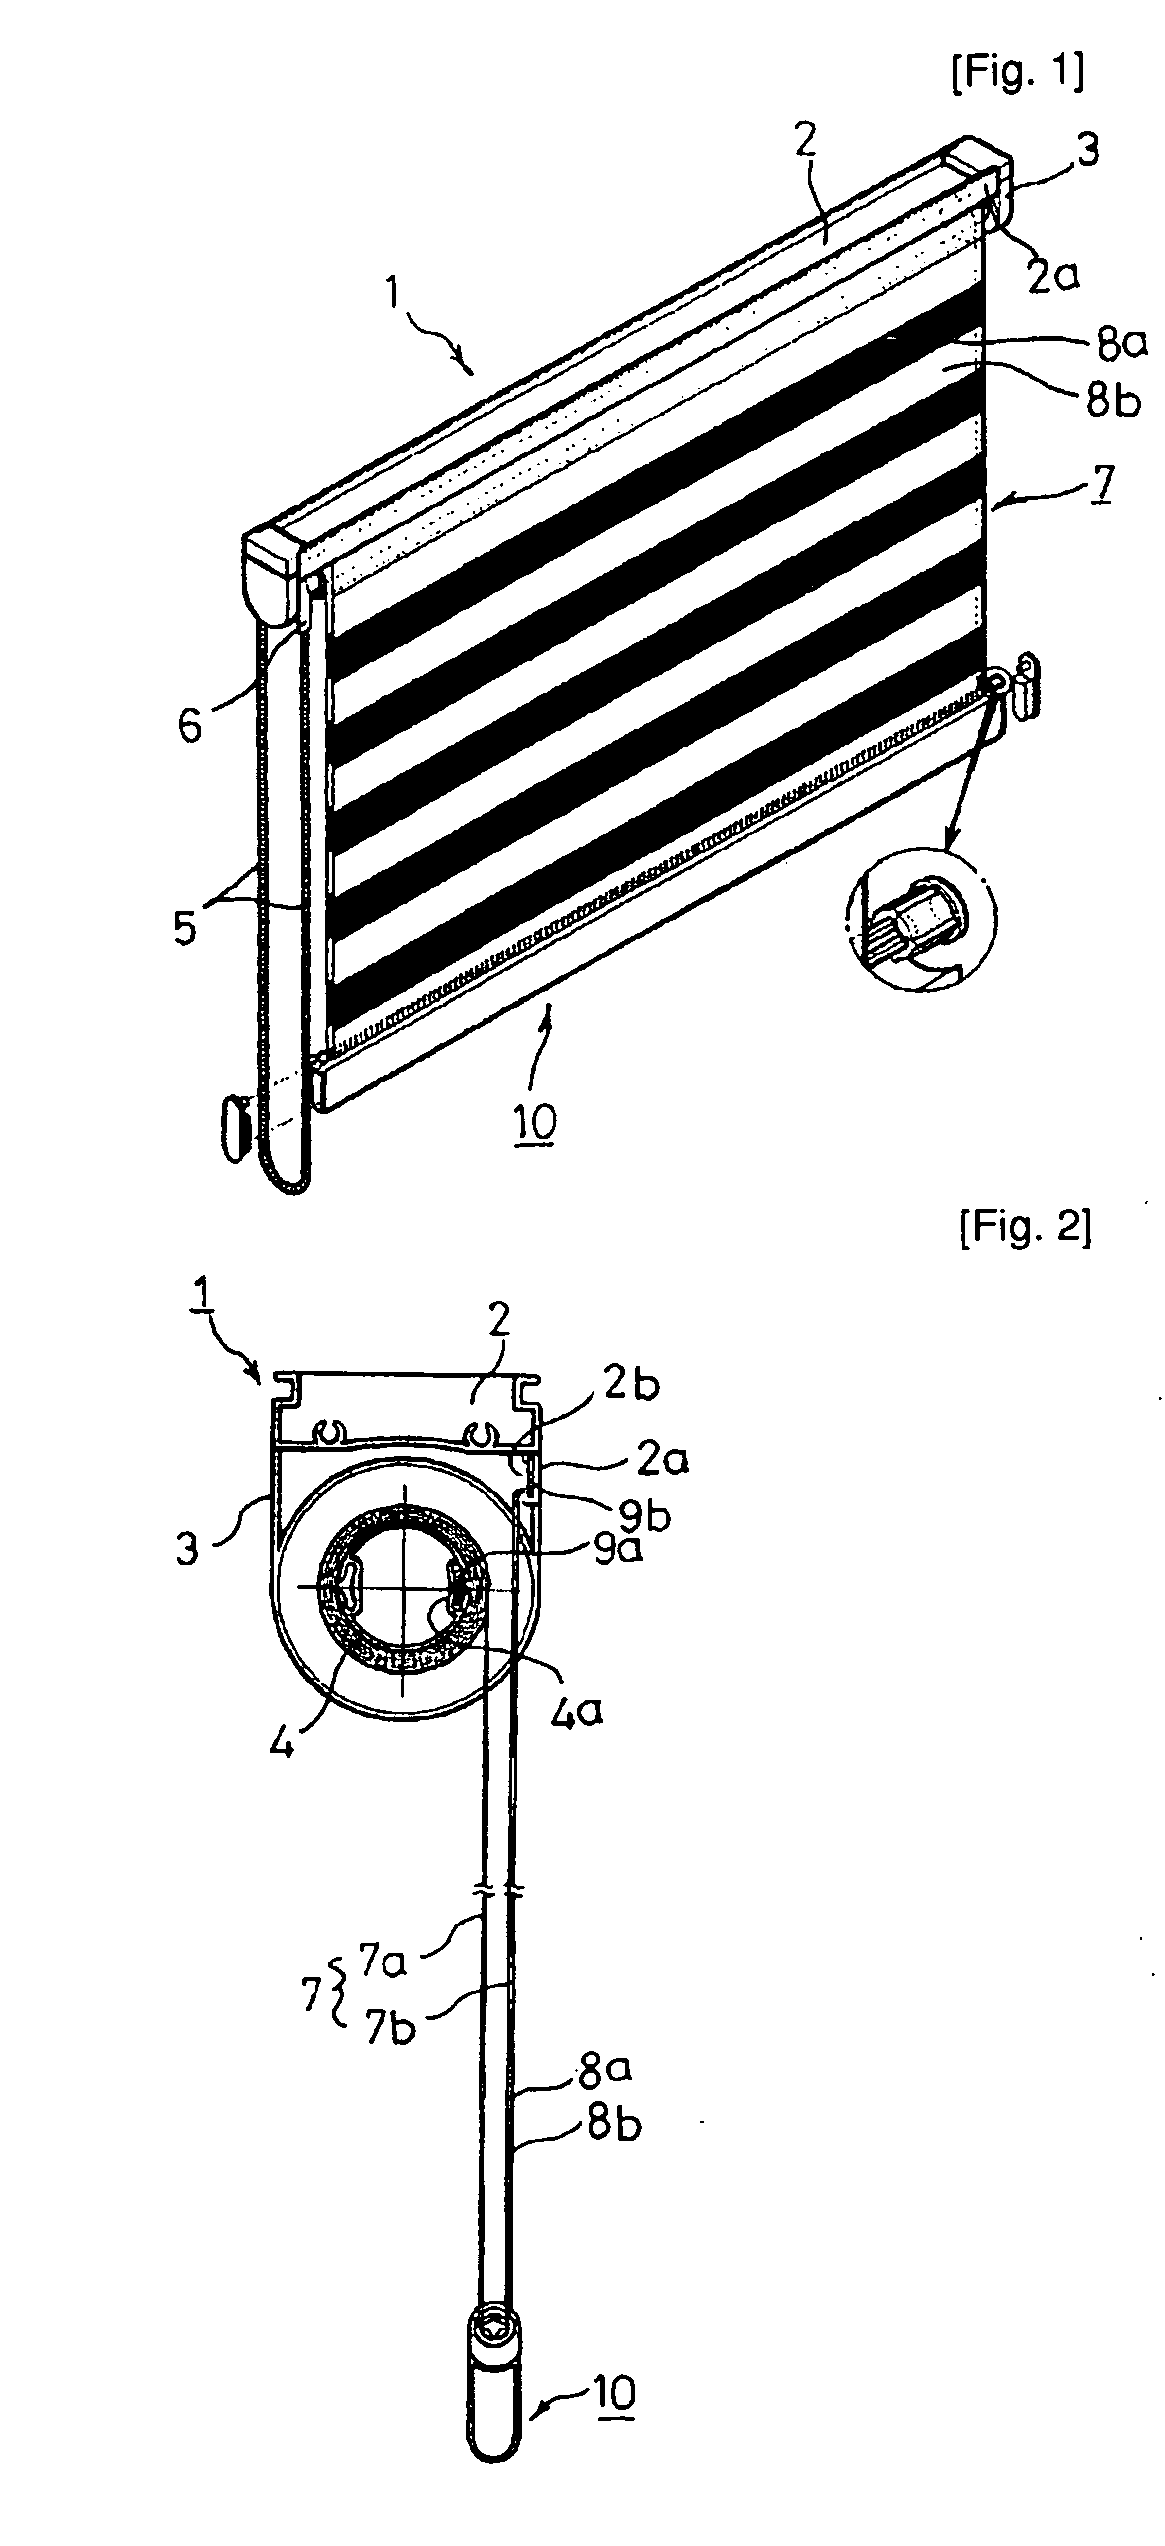 Blinds for adjusting illumination made of thick material